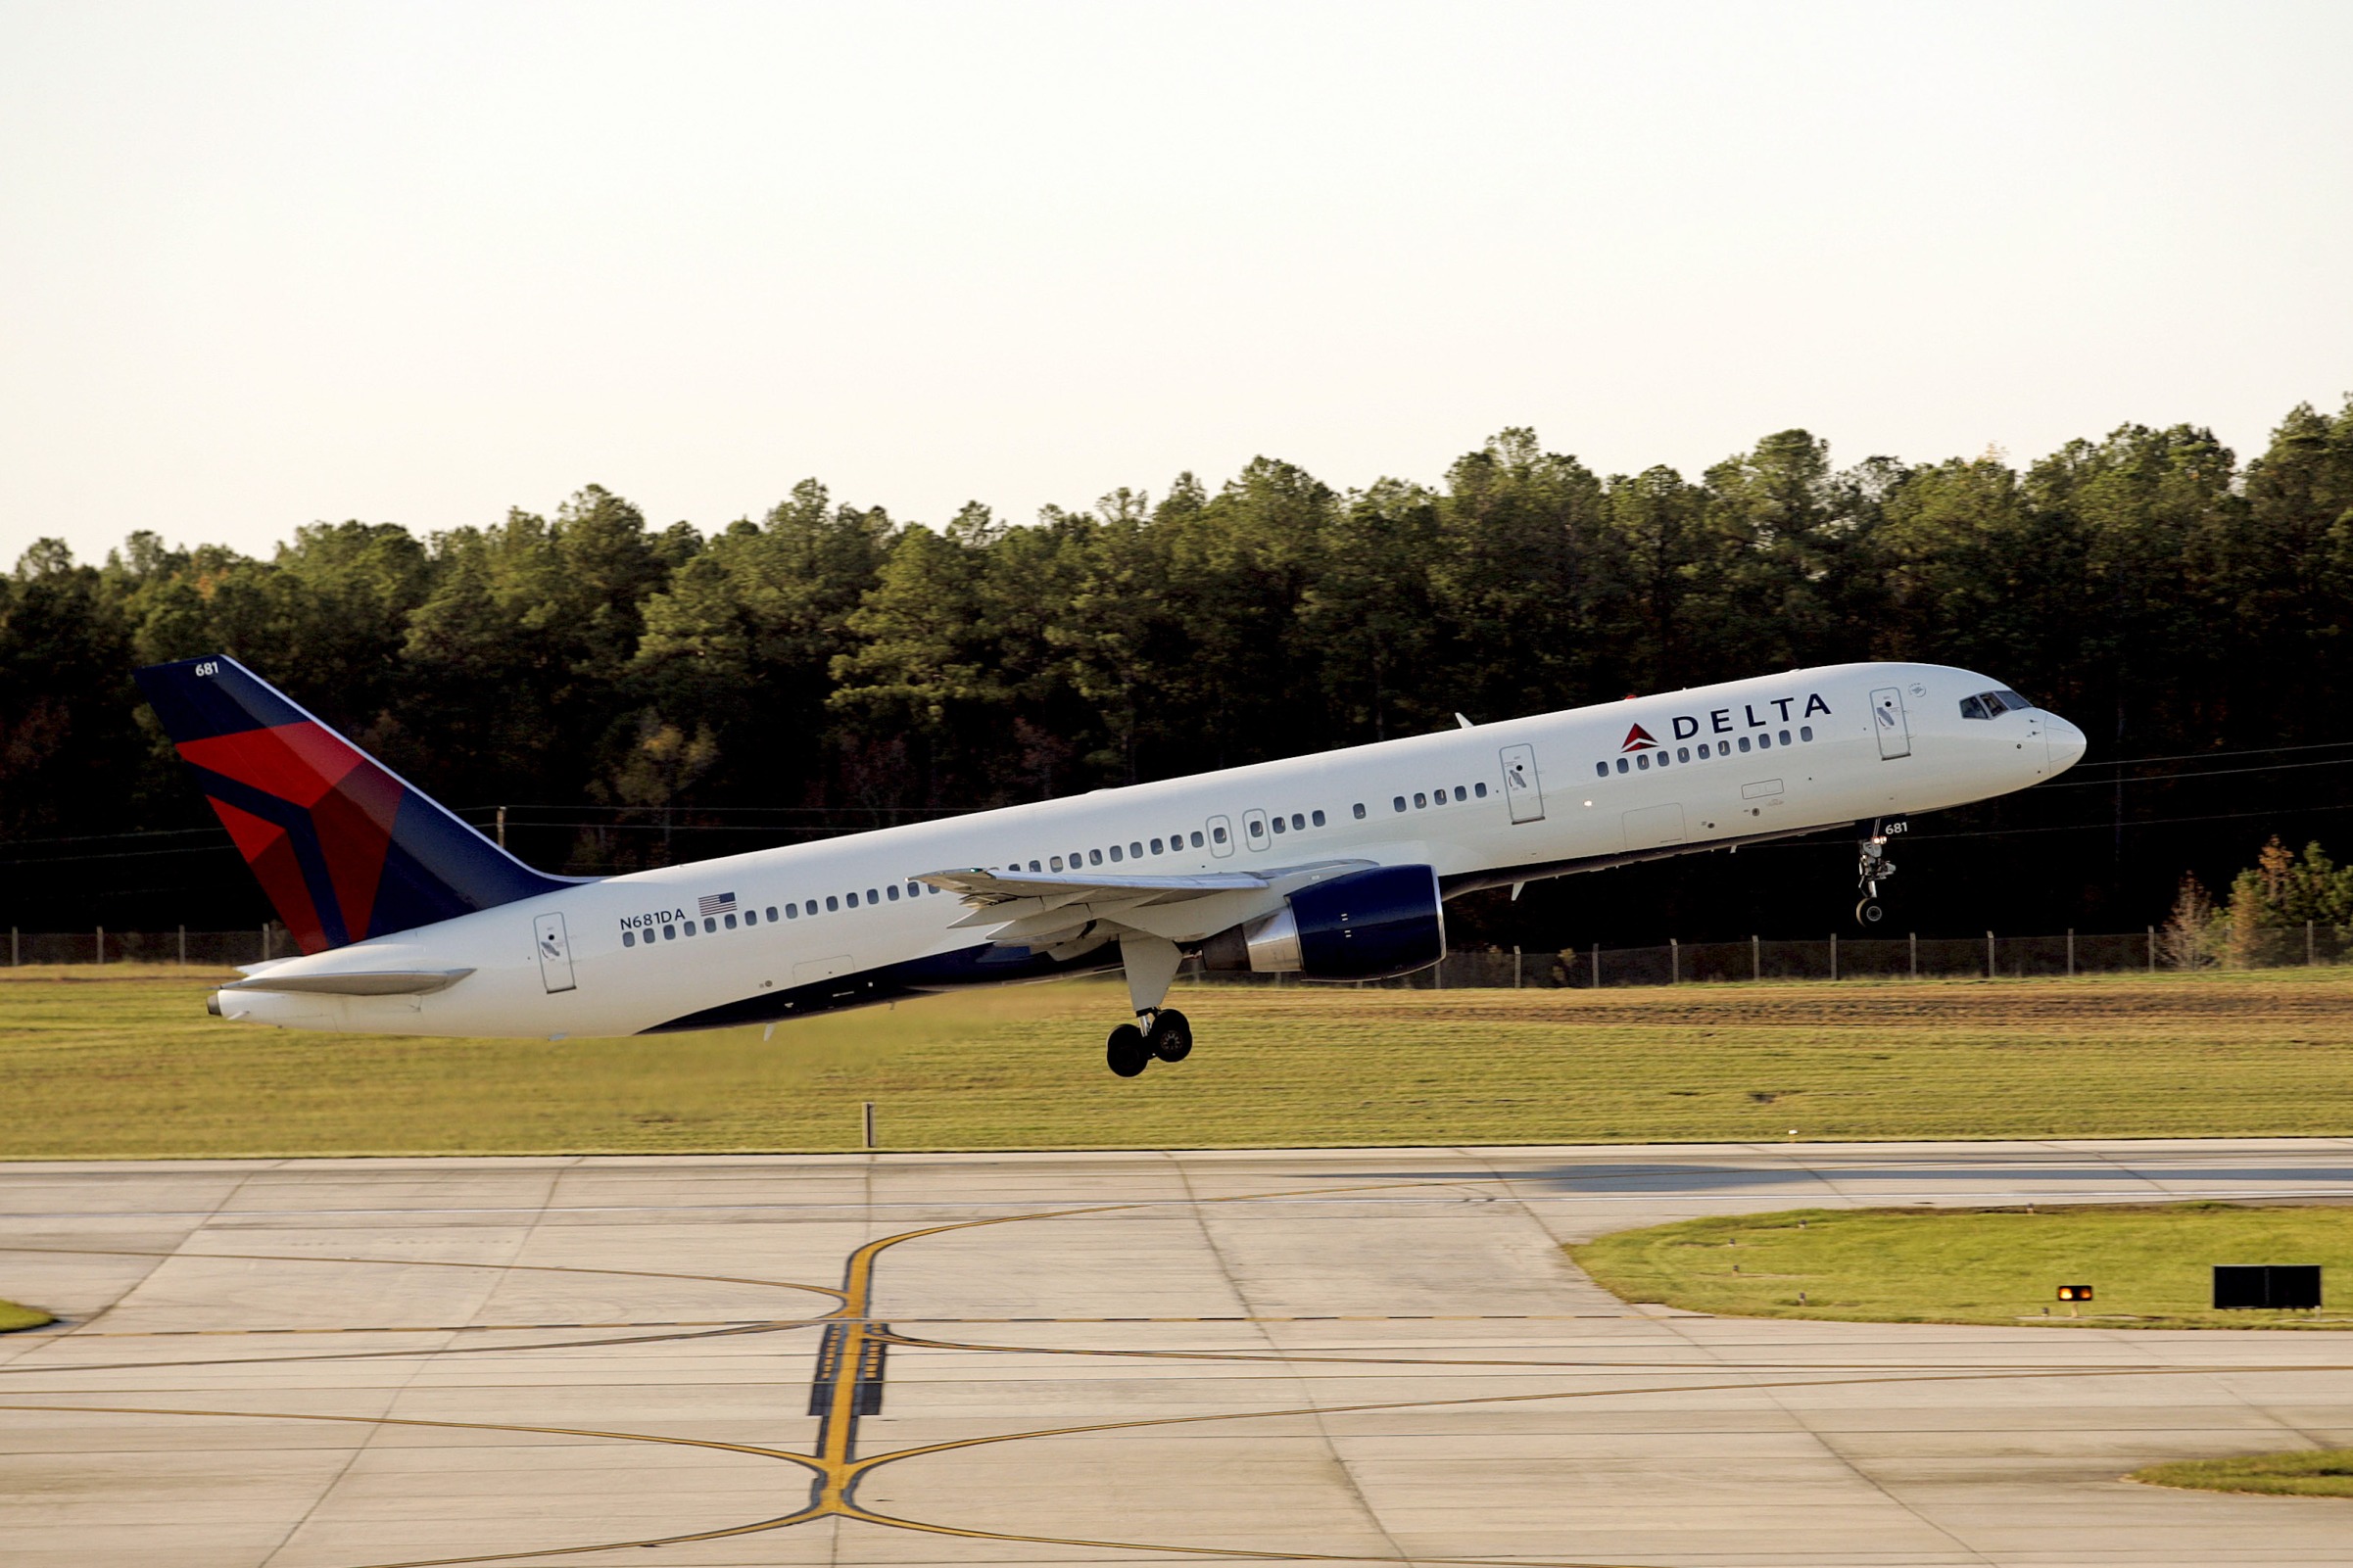 U.S. Air Carriers At Raleigh Airport